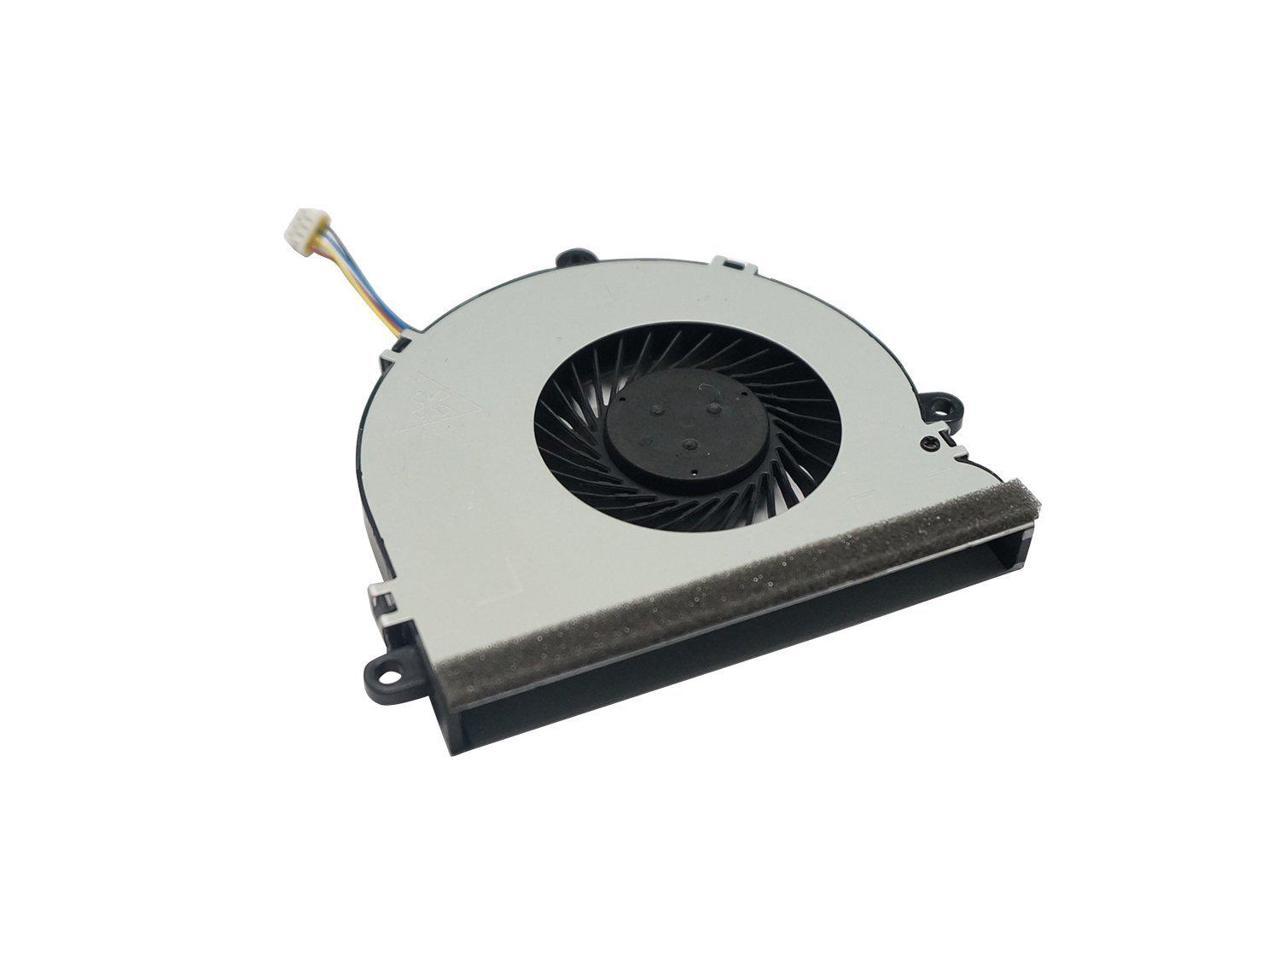 Original New For HP 15-bs075nr 15-bs015dx 15-bs012ds Series CPU FAN with Grease